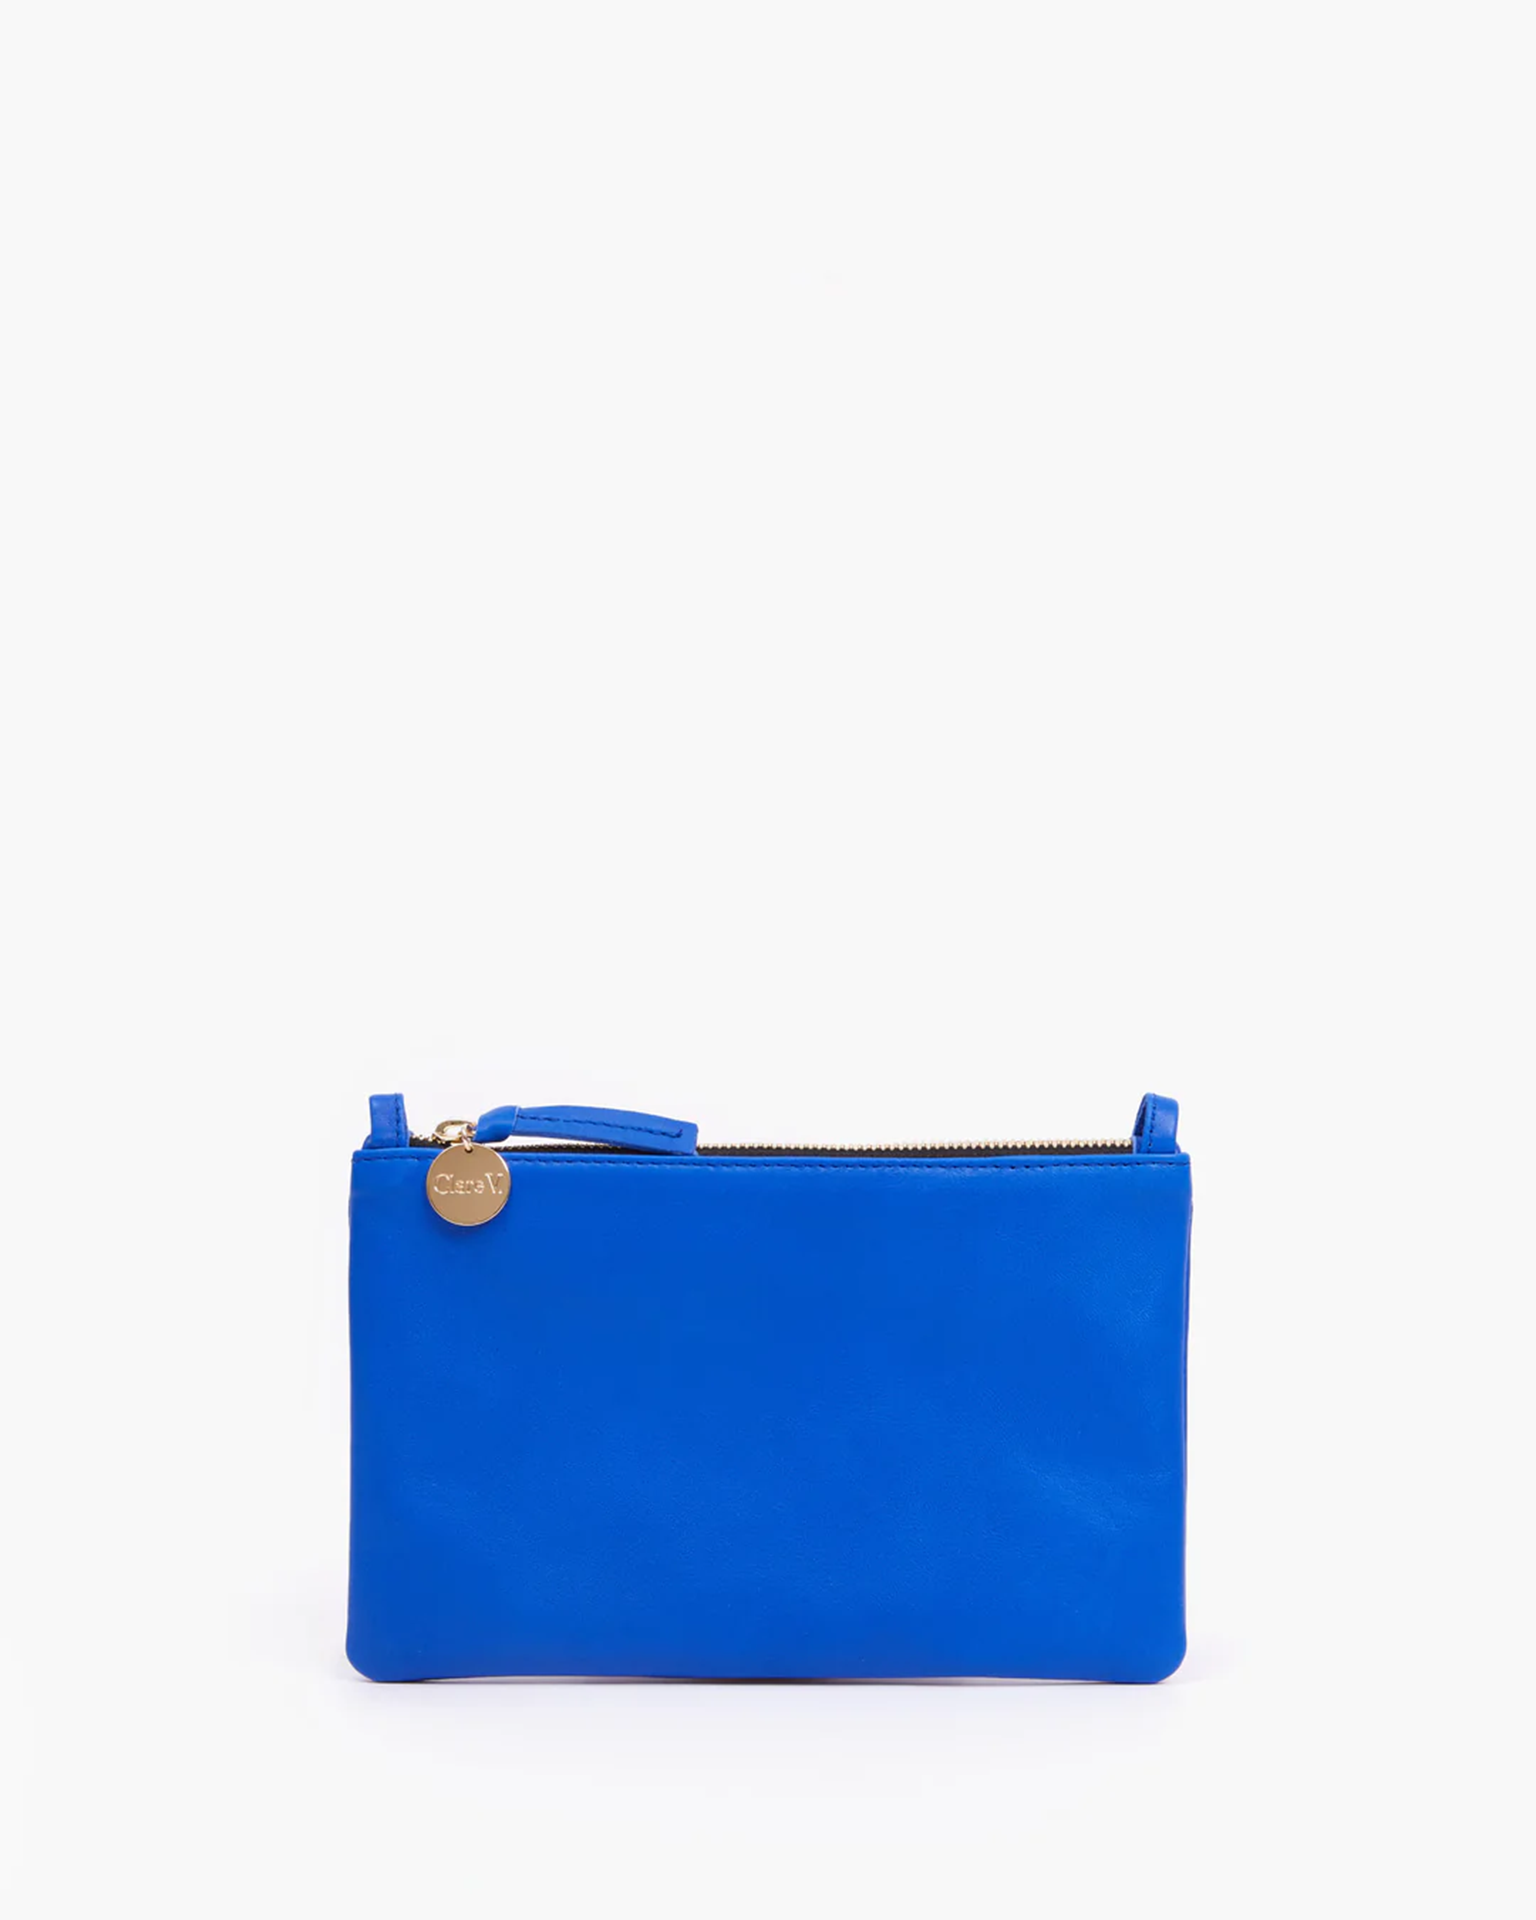 Wallet Clutch – Clare V.